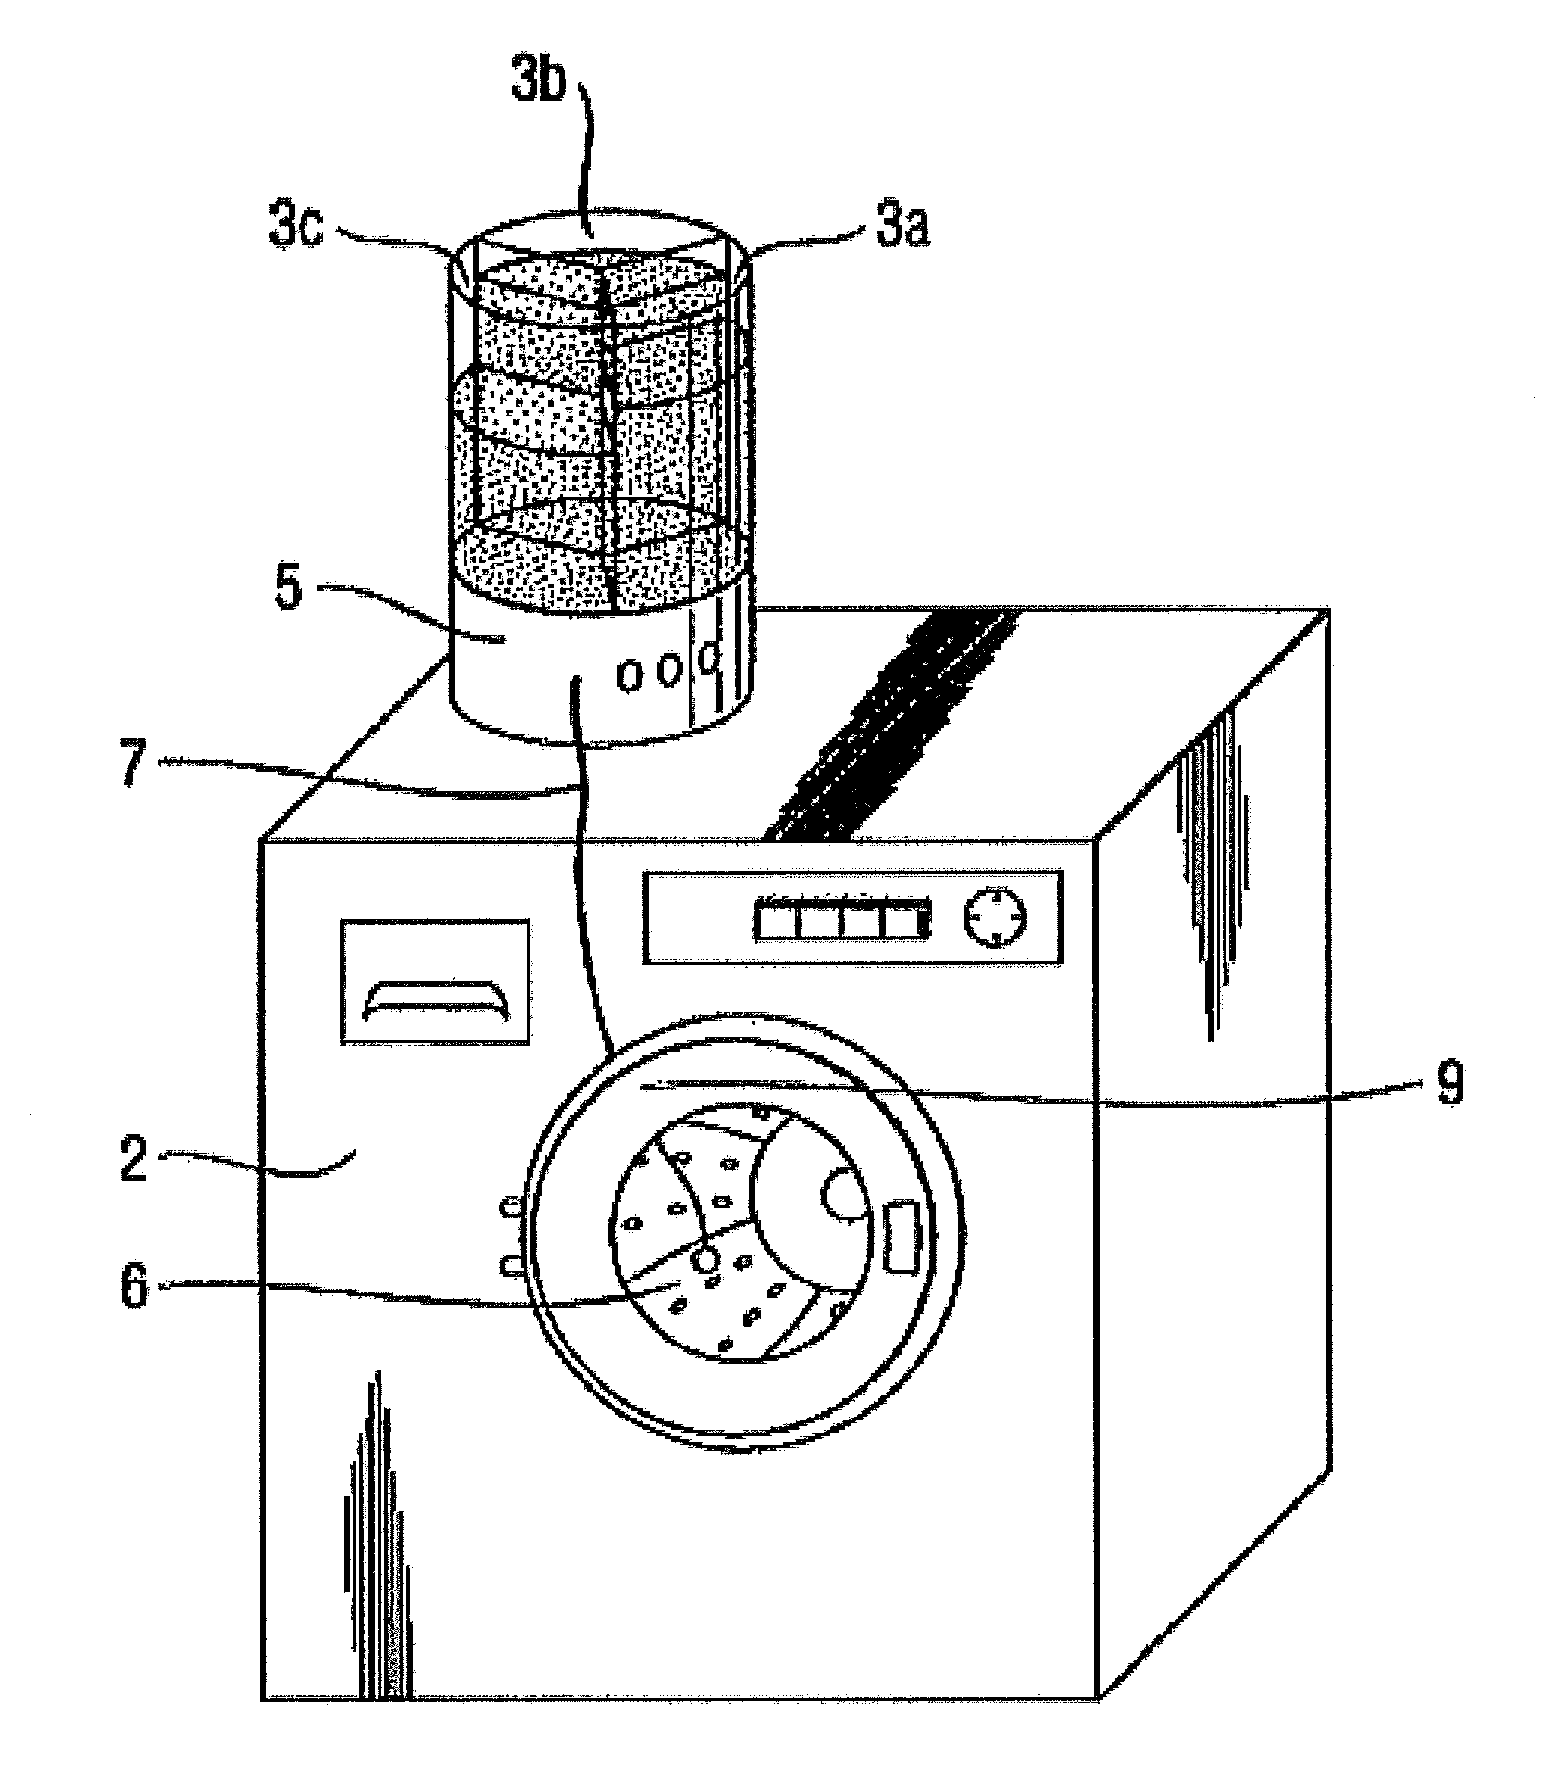 Metering system for use in conjunction with a water-conducting household appliance such as a washing machine, dishwasher, clothes dryer or the like